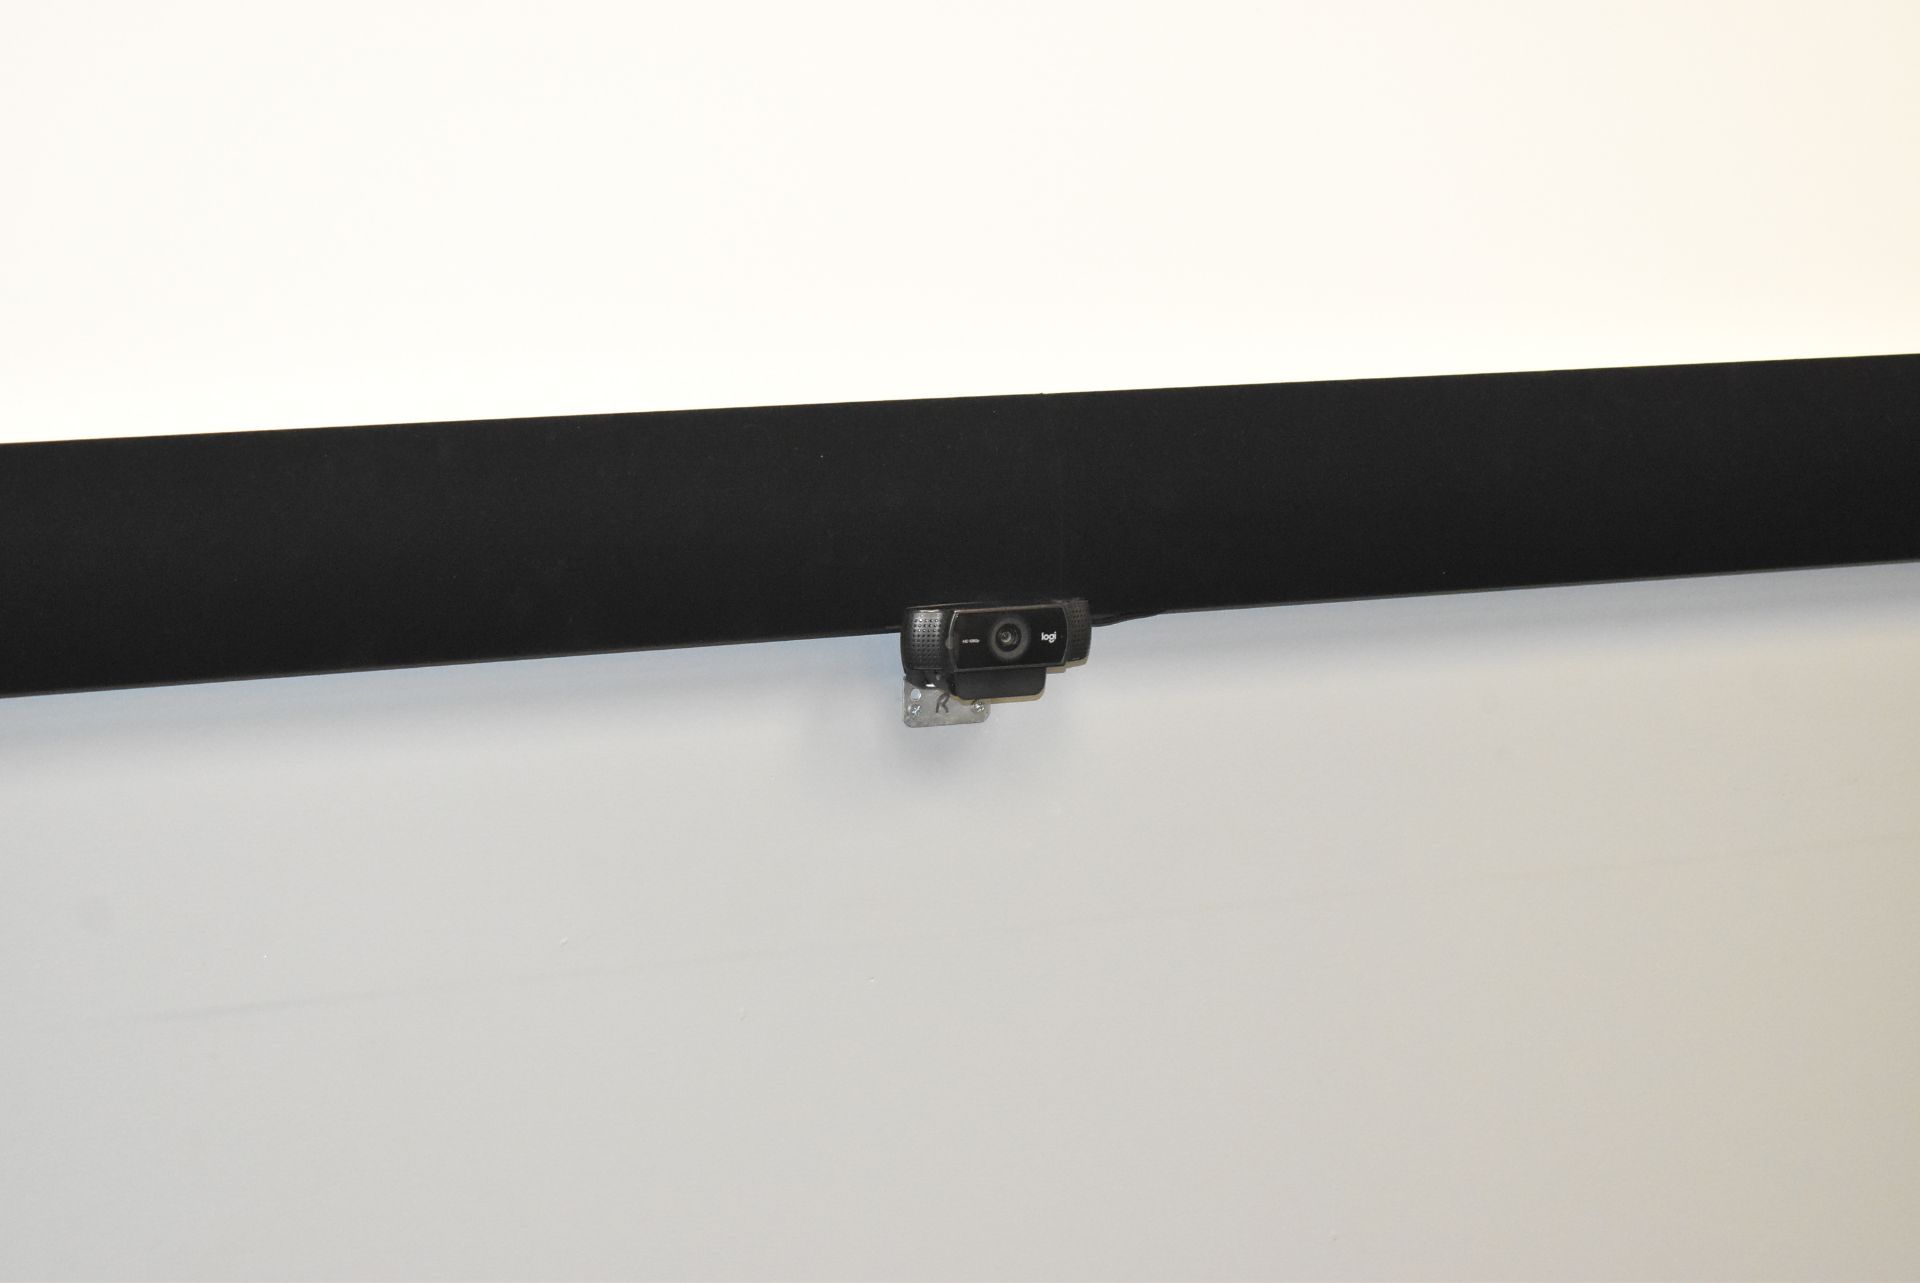 LOT/ ELUNEVISION FIXED FRAME PROJECTION SCREEN WITH BENO CEILING MOUNTED PROJECTOR - Image 7 of 7